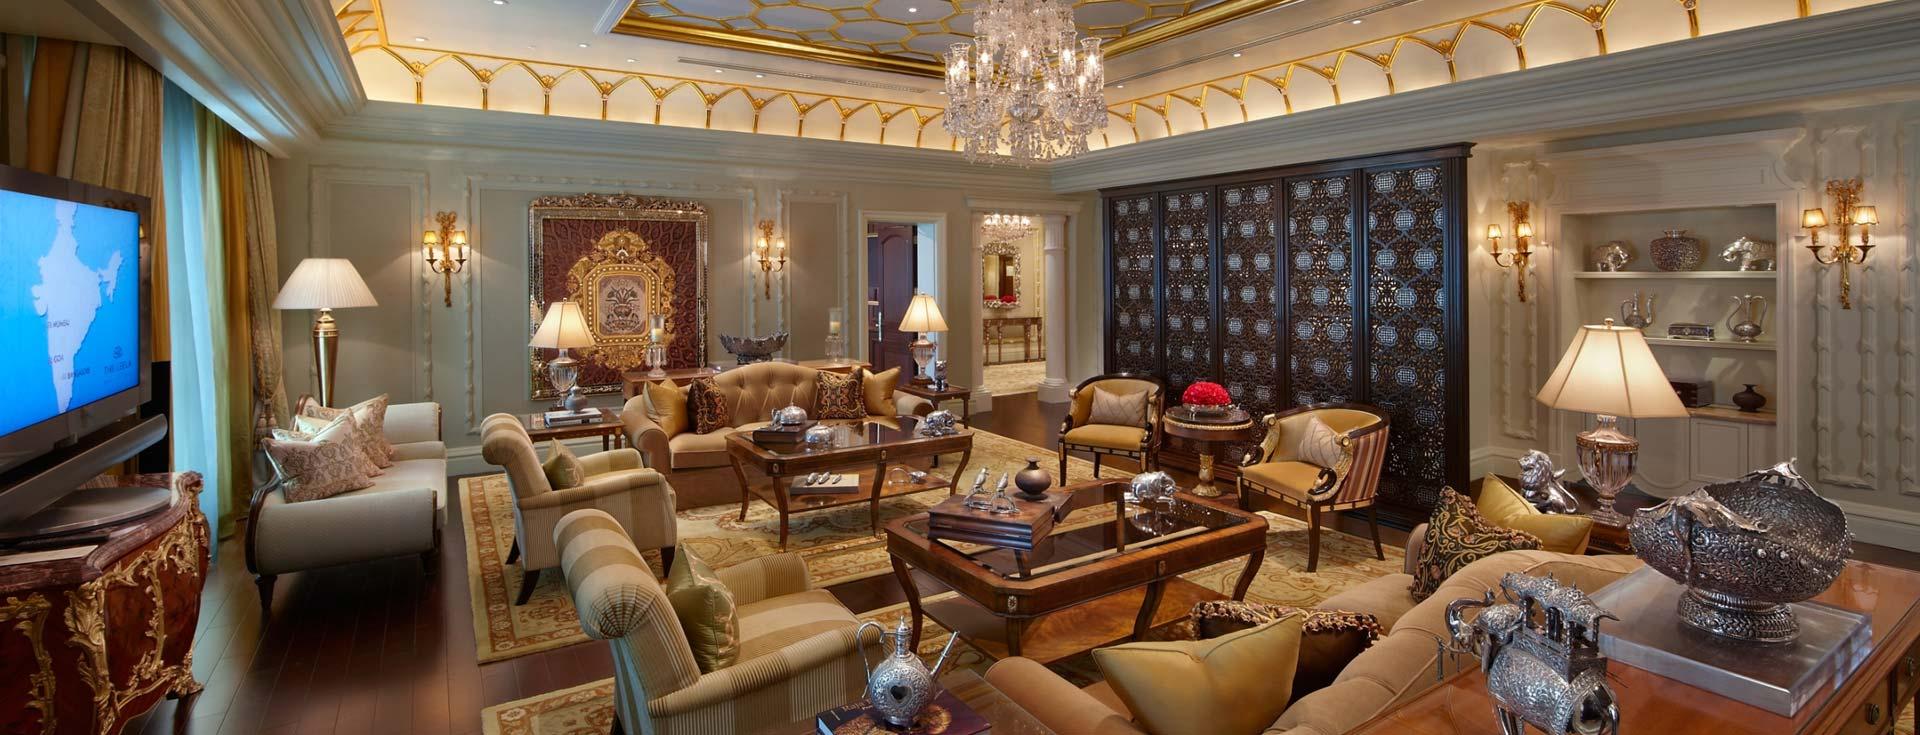 Presidential Suite - The Leela Palace New Delhi 